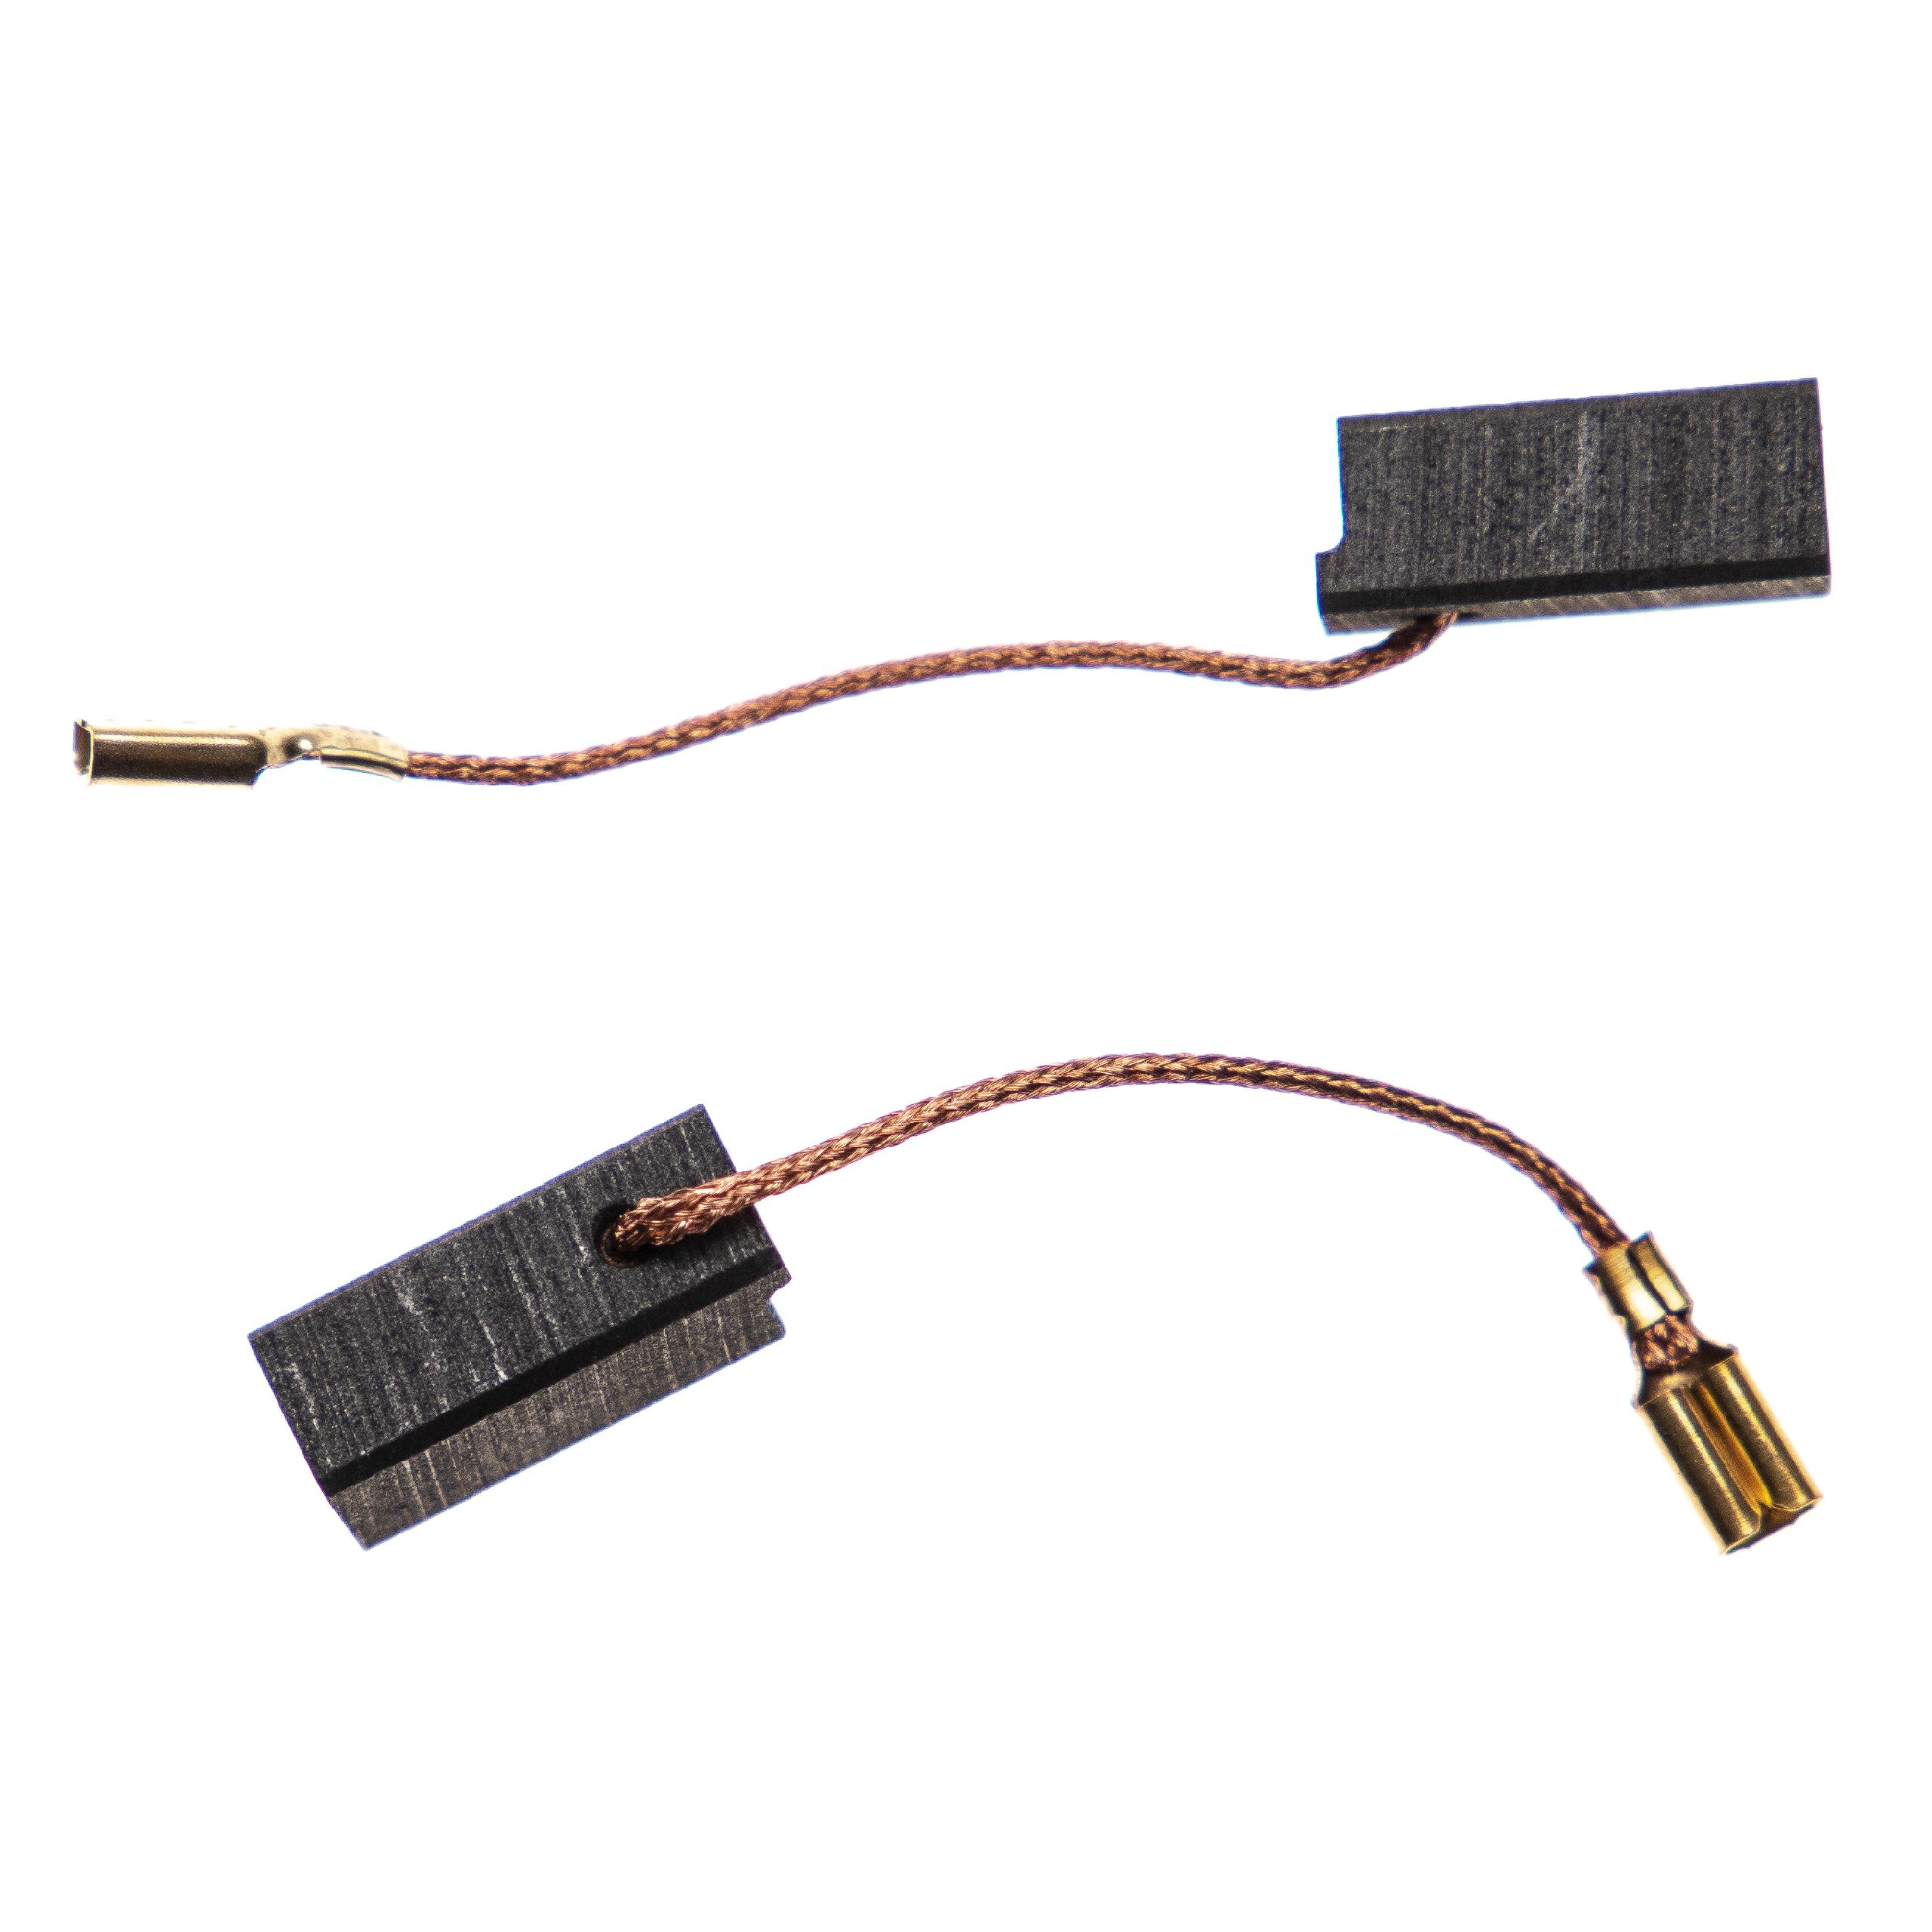 2x Carbon Brush as Replacement for Dremel 2-610-353-931, DREM3 Electric Power Tools, 14 x 6 x 6mm